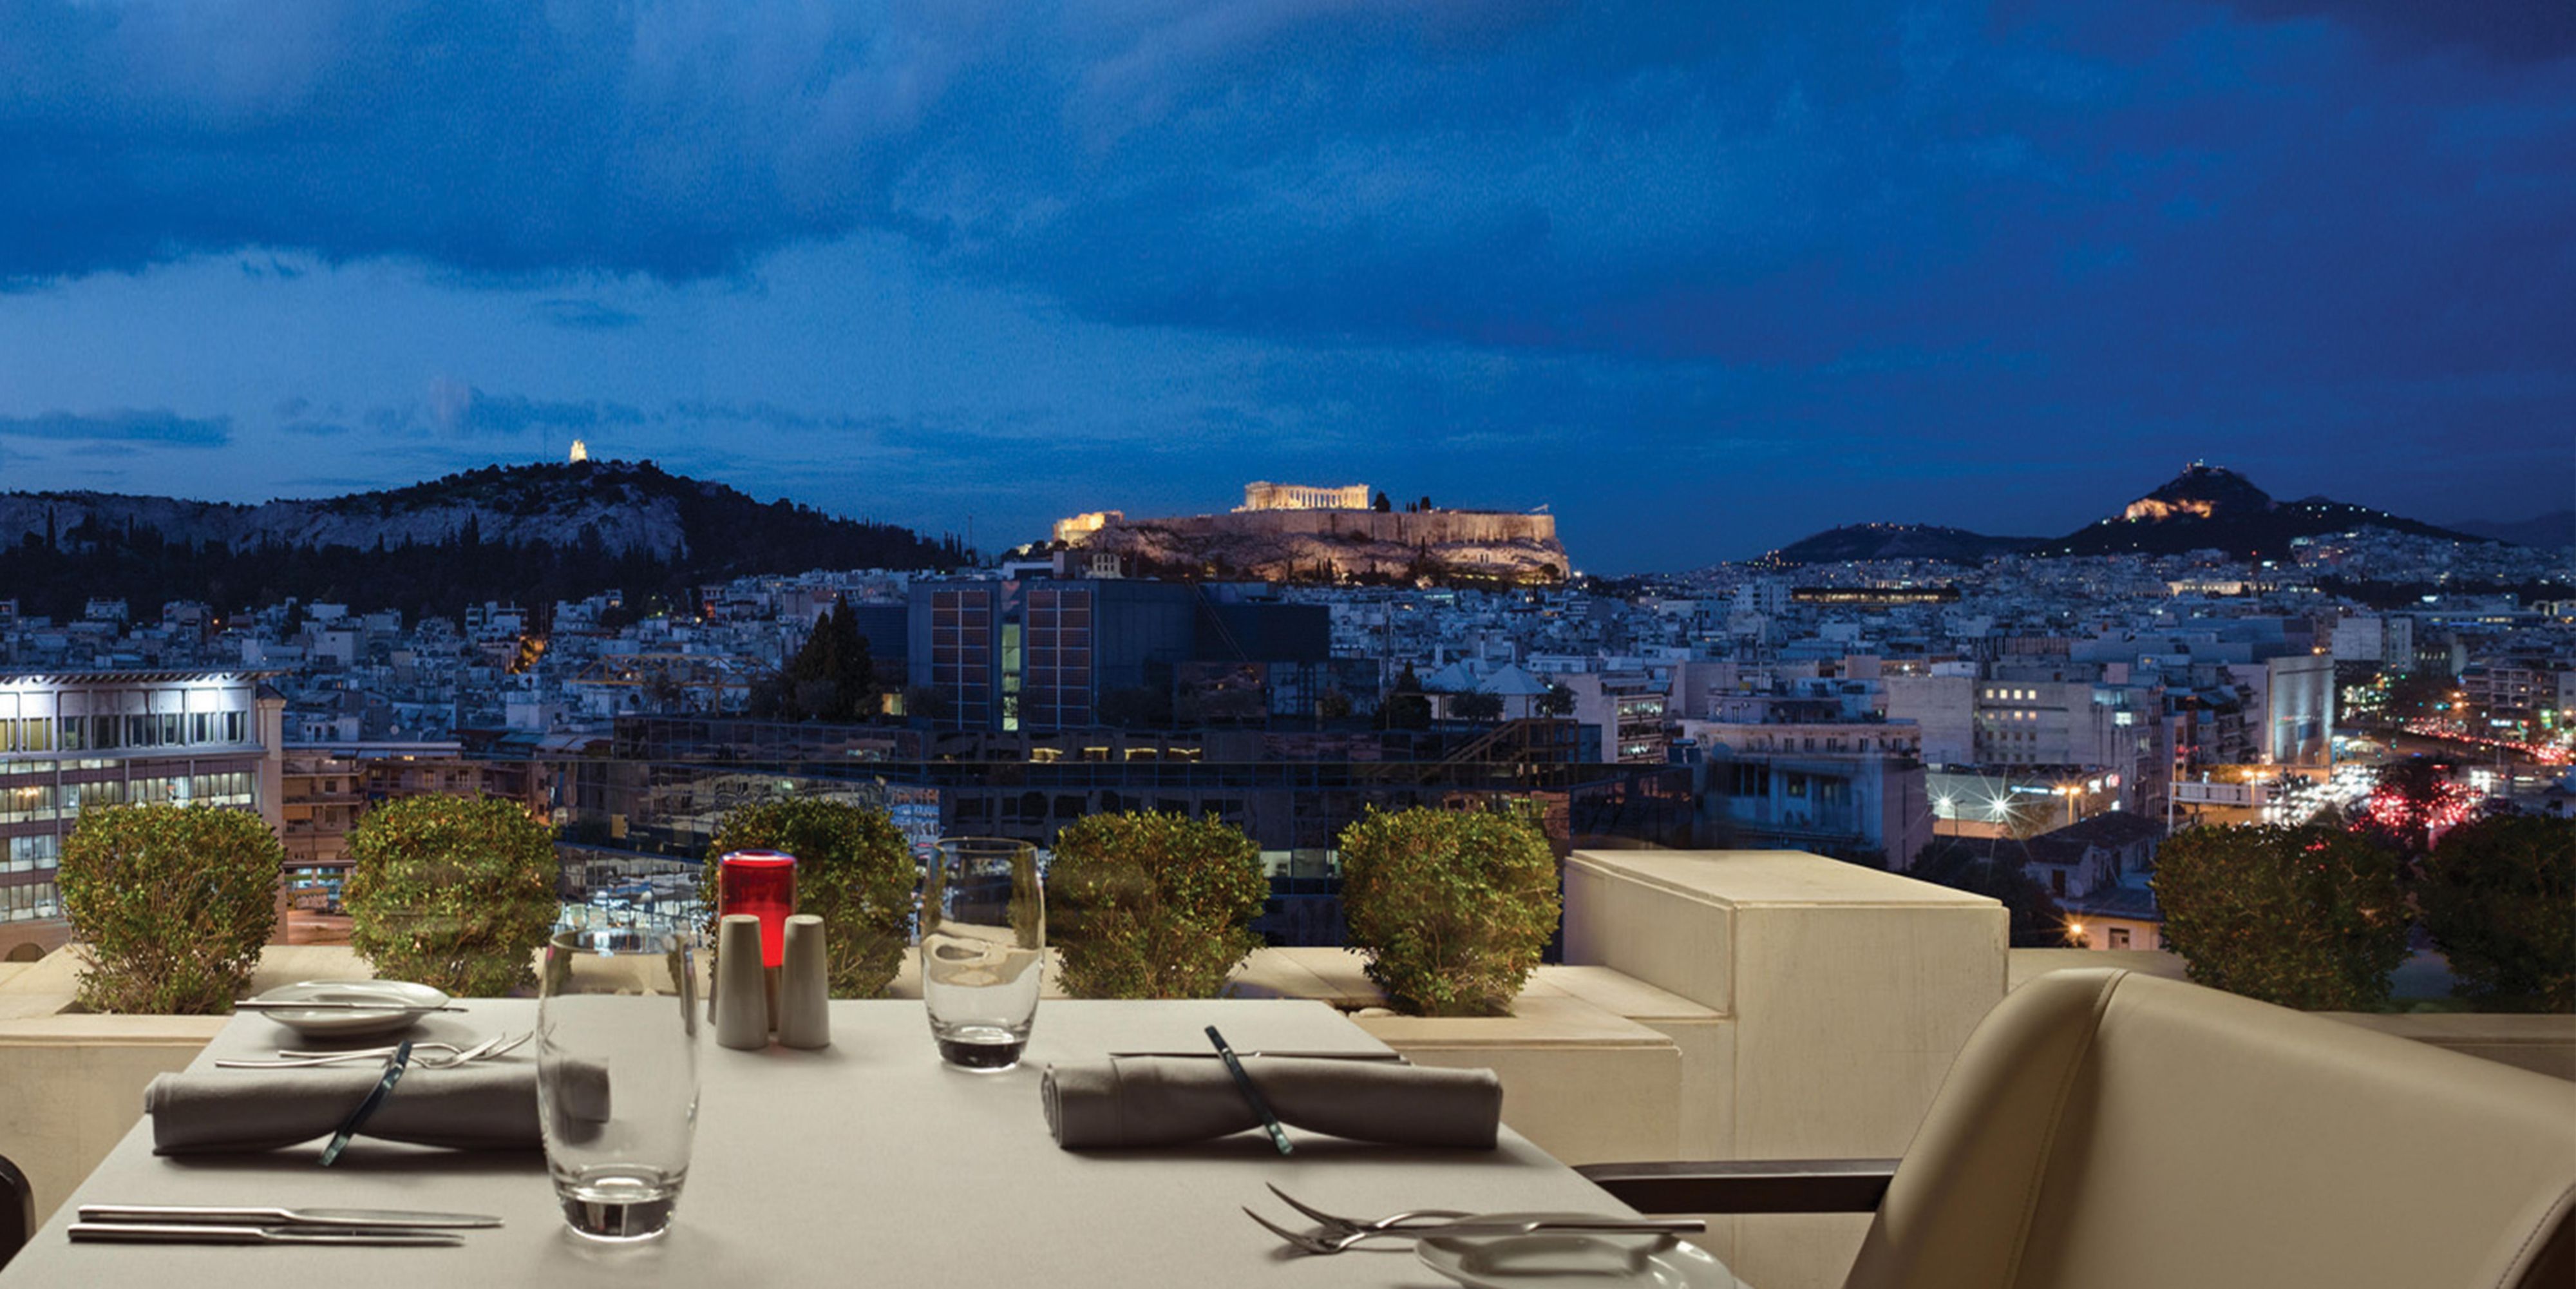 Boasting sweeping views of the Acropolis, Première gazes out onto the city of Athens from its lofty rooftop perch, with exquisite flavors and one-of-a-kind service. Winter and summer alike, the Acropolis dramatically fills the restaurant’s interior space. During summer months, the restaurant opens its doors out onto its stunning rooftop terrace.